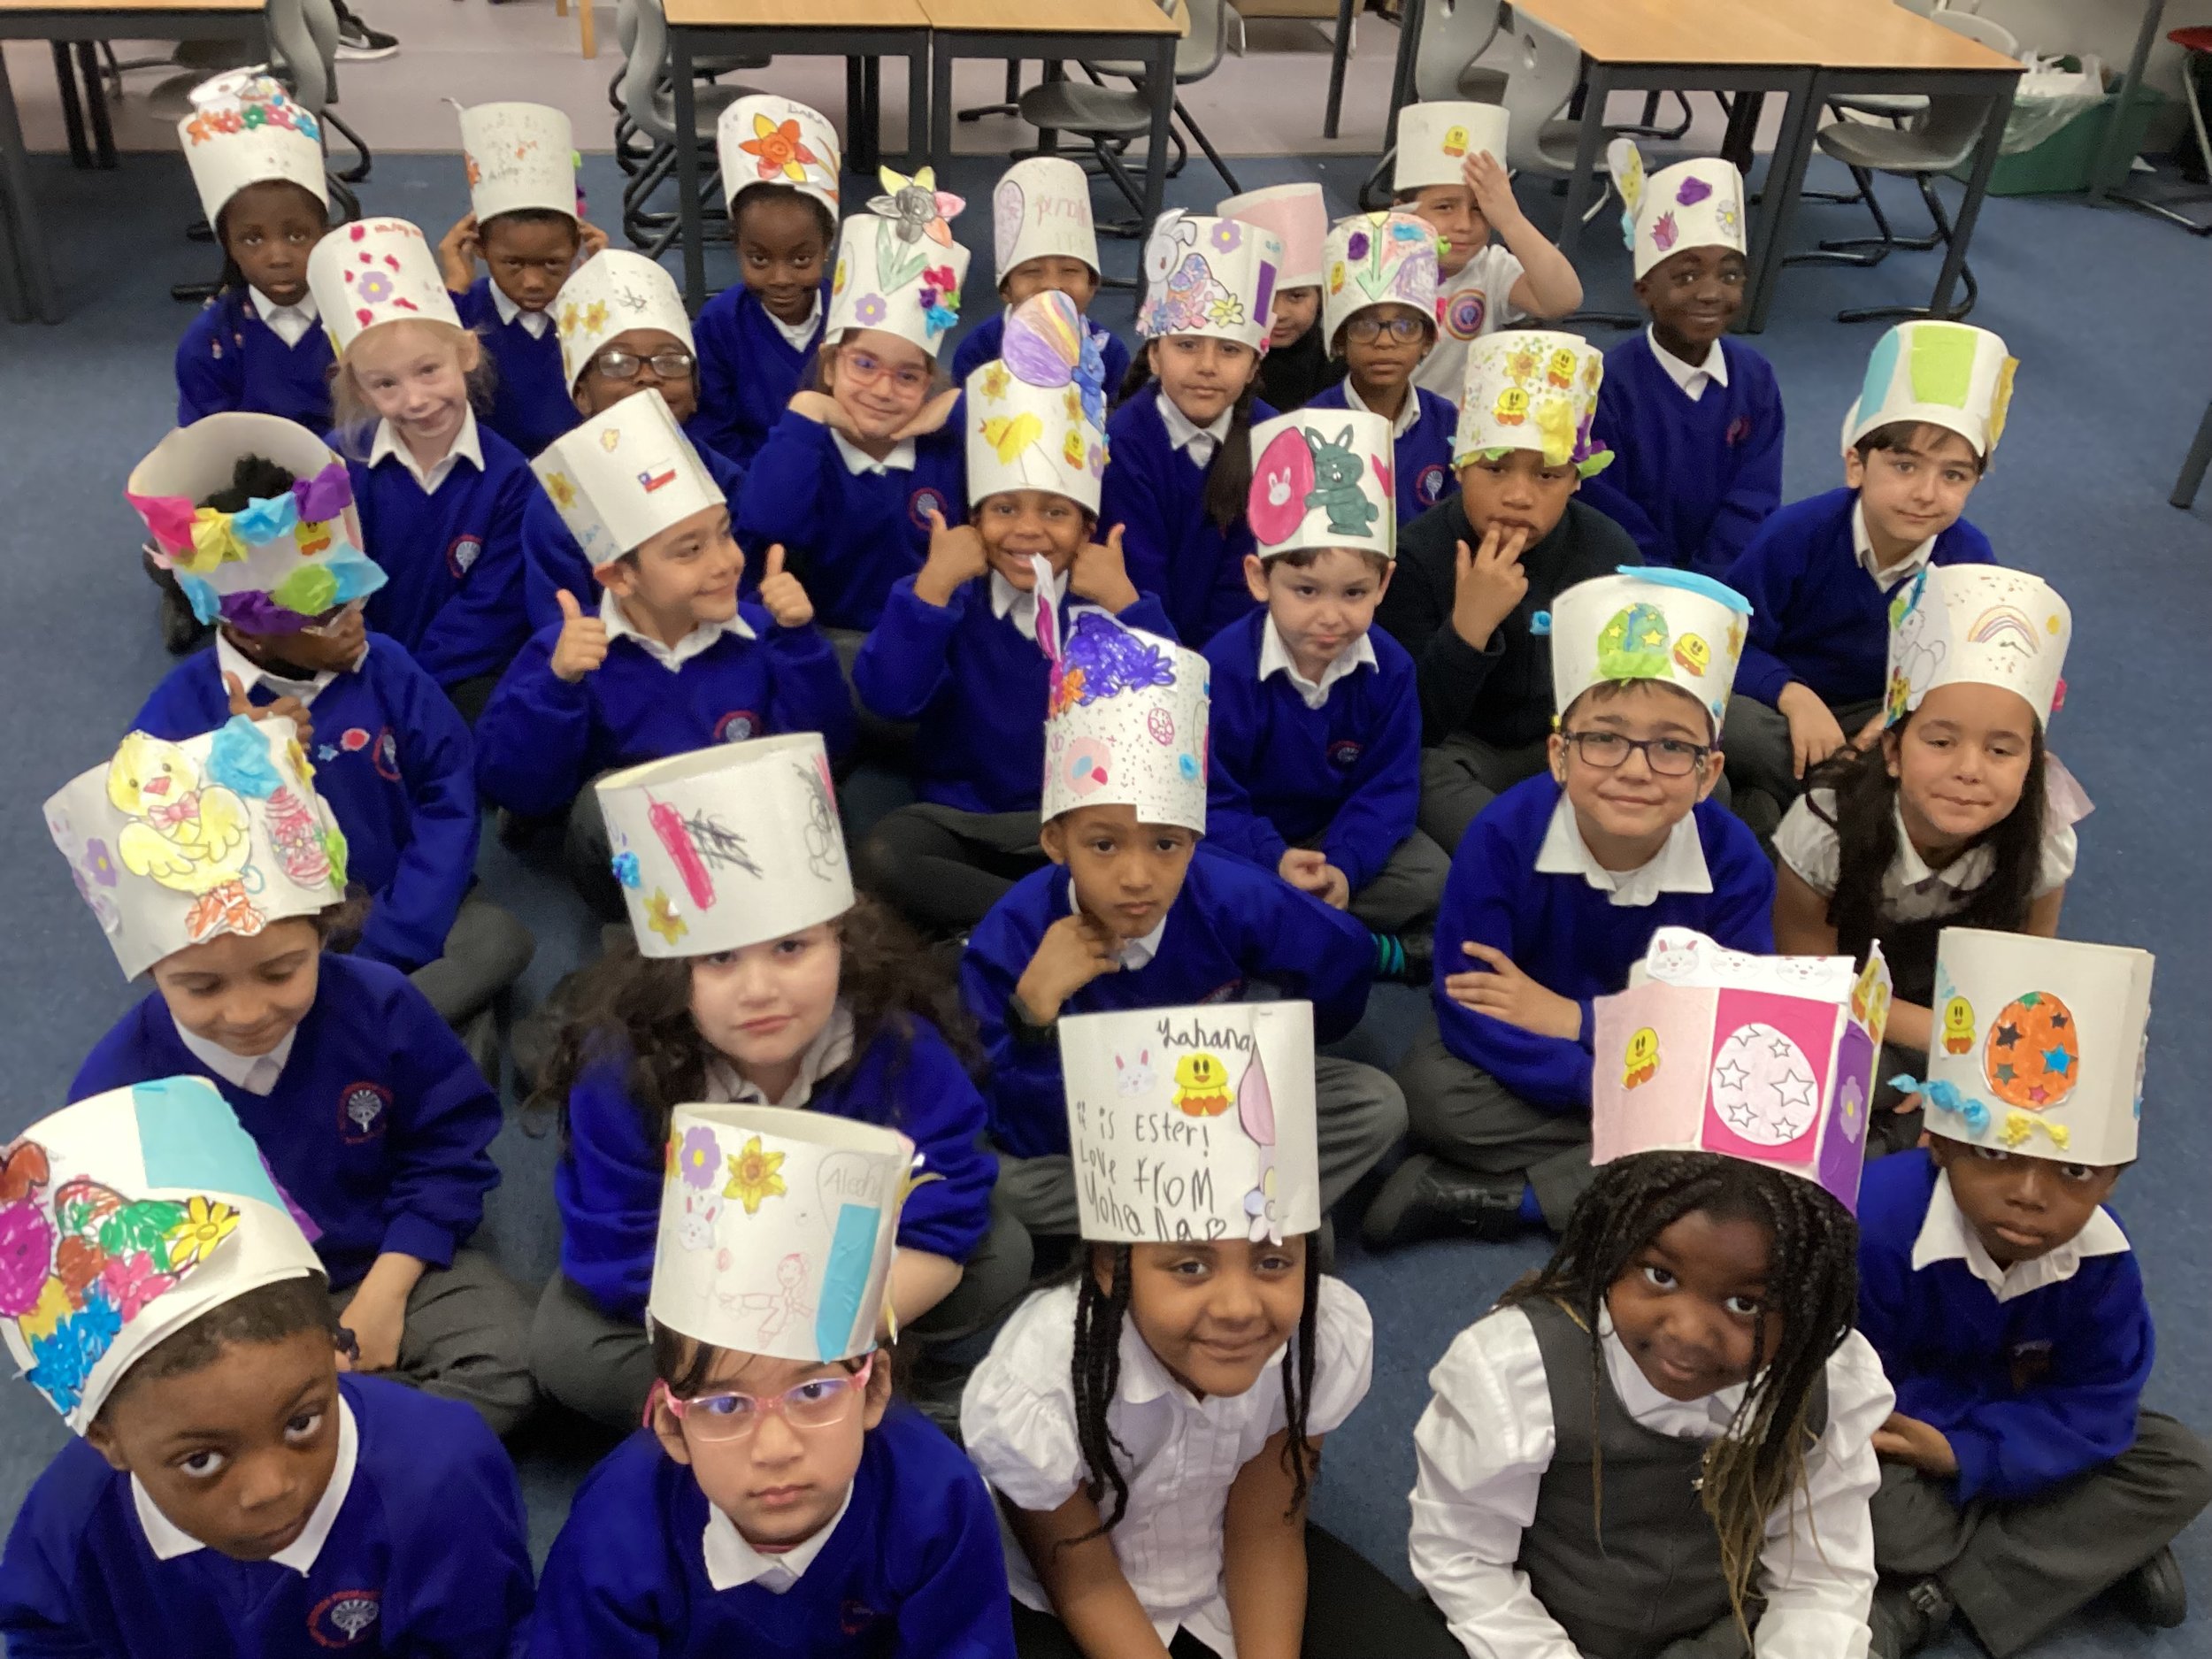 DT - Easter Bonnets For Our Parade!